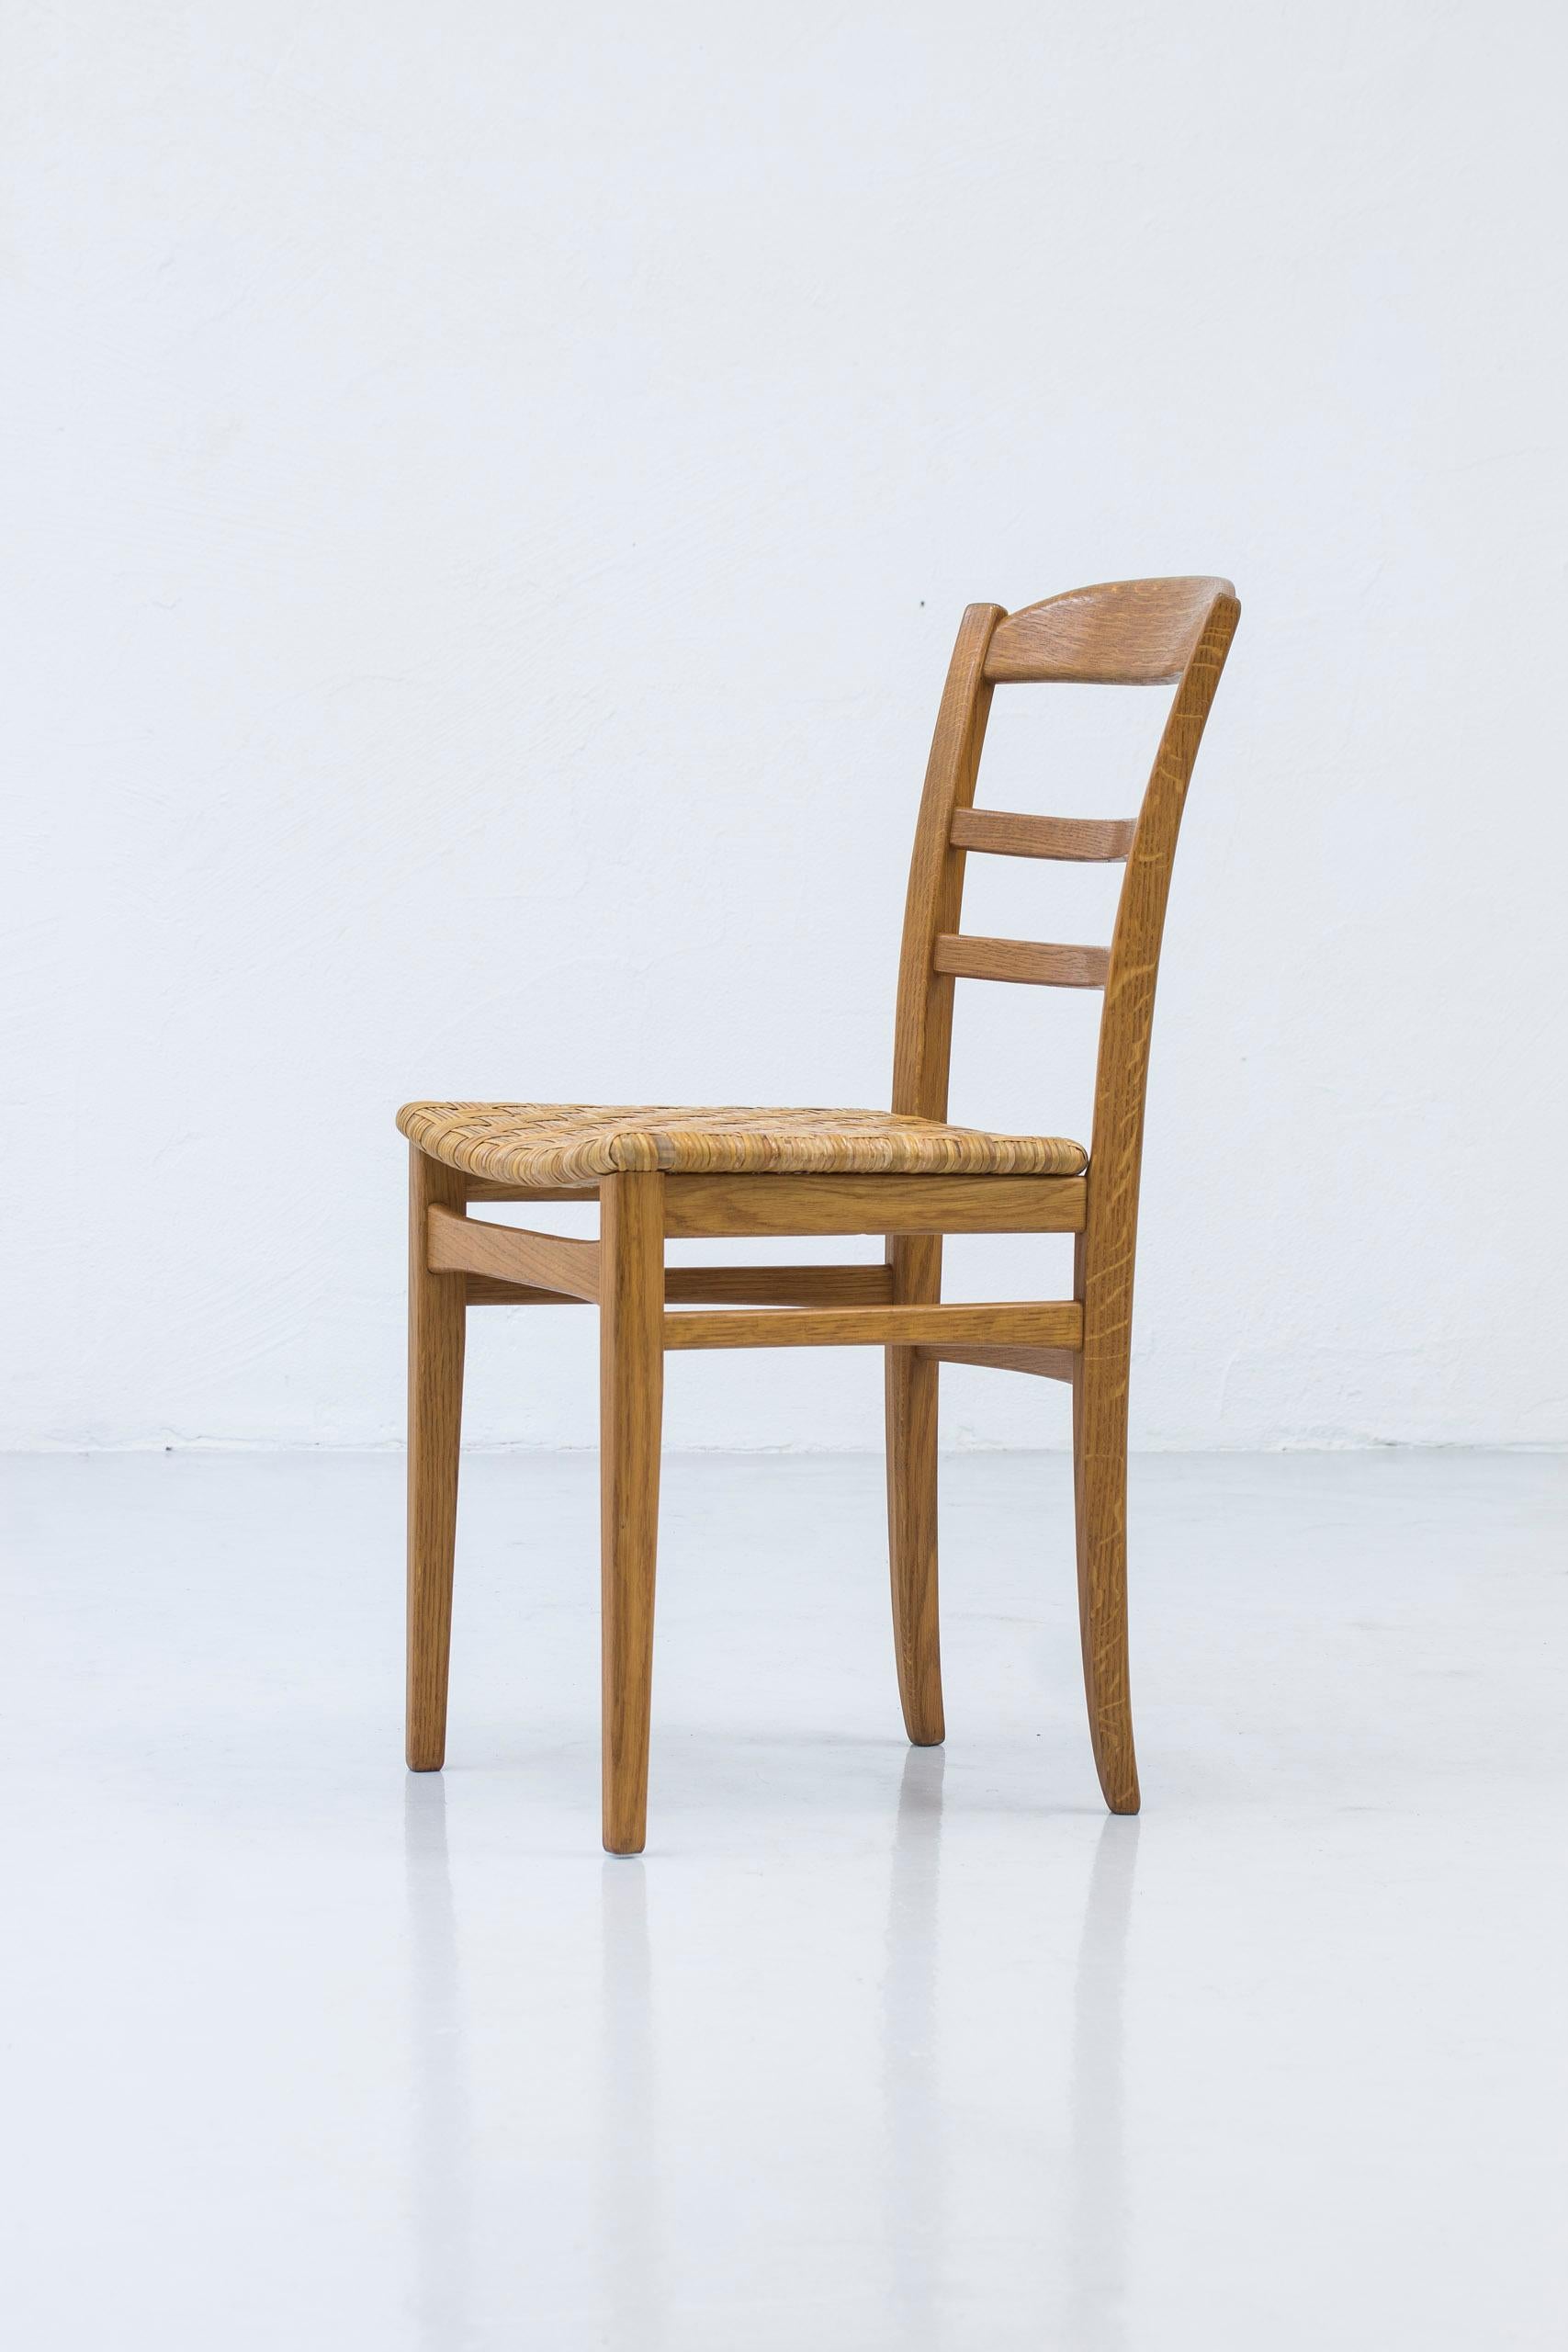 Oak and Cane Weave Dining Chairs by Carl Malmsten, Swedish Modern, 1950s For Sale 5